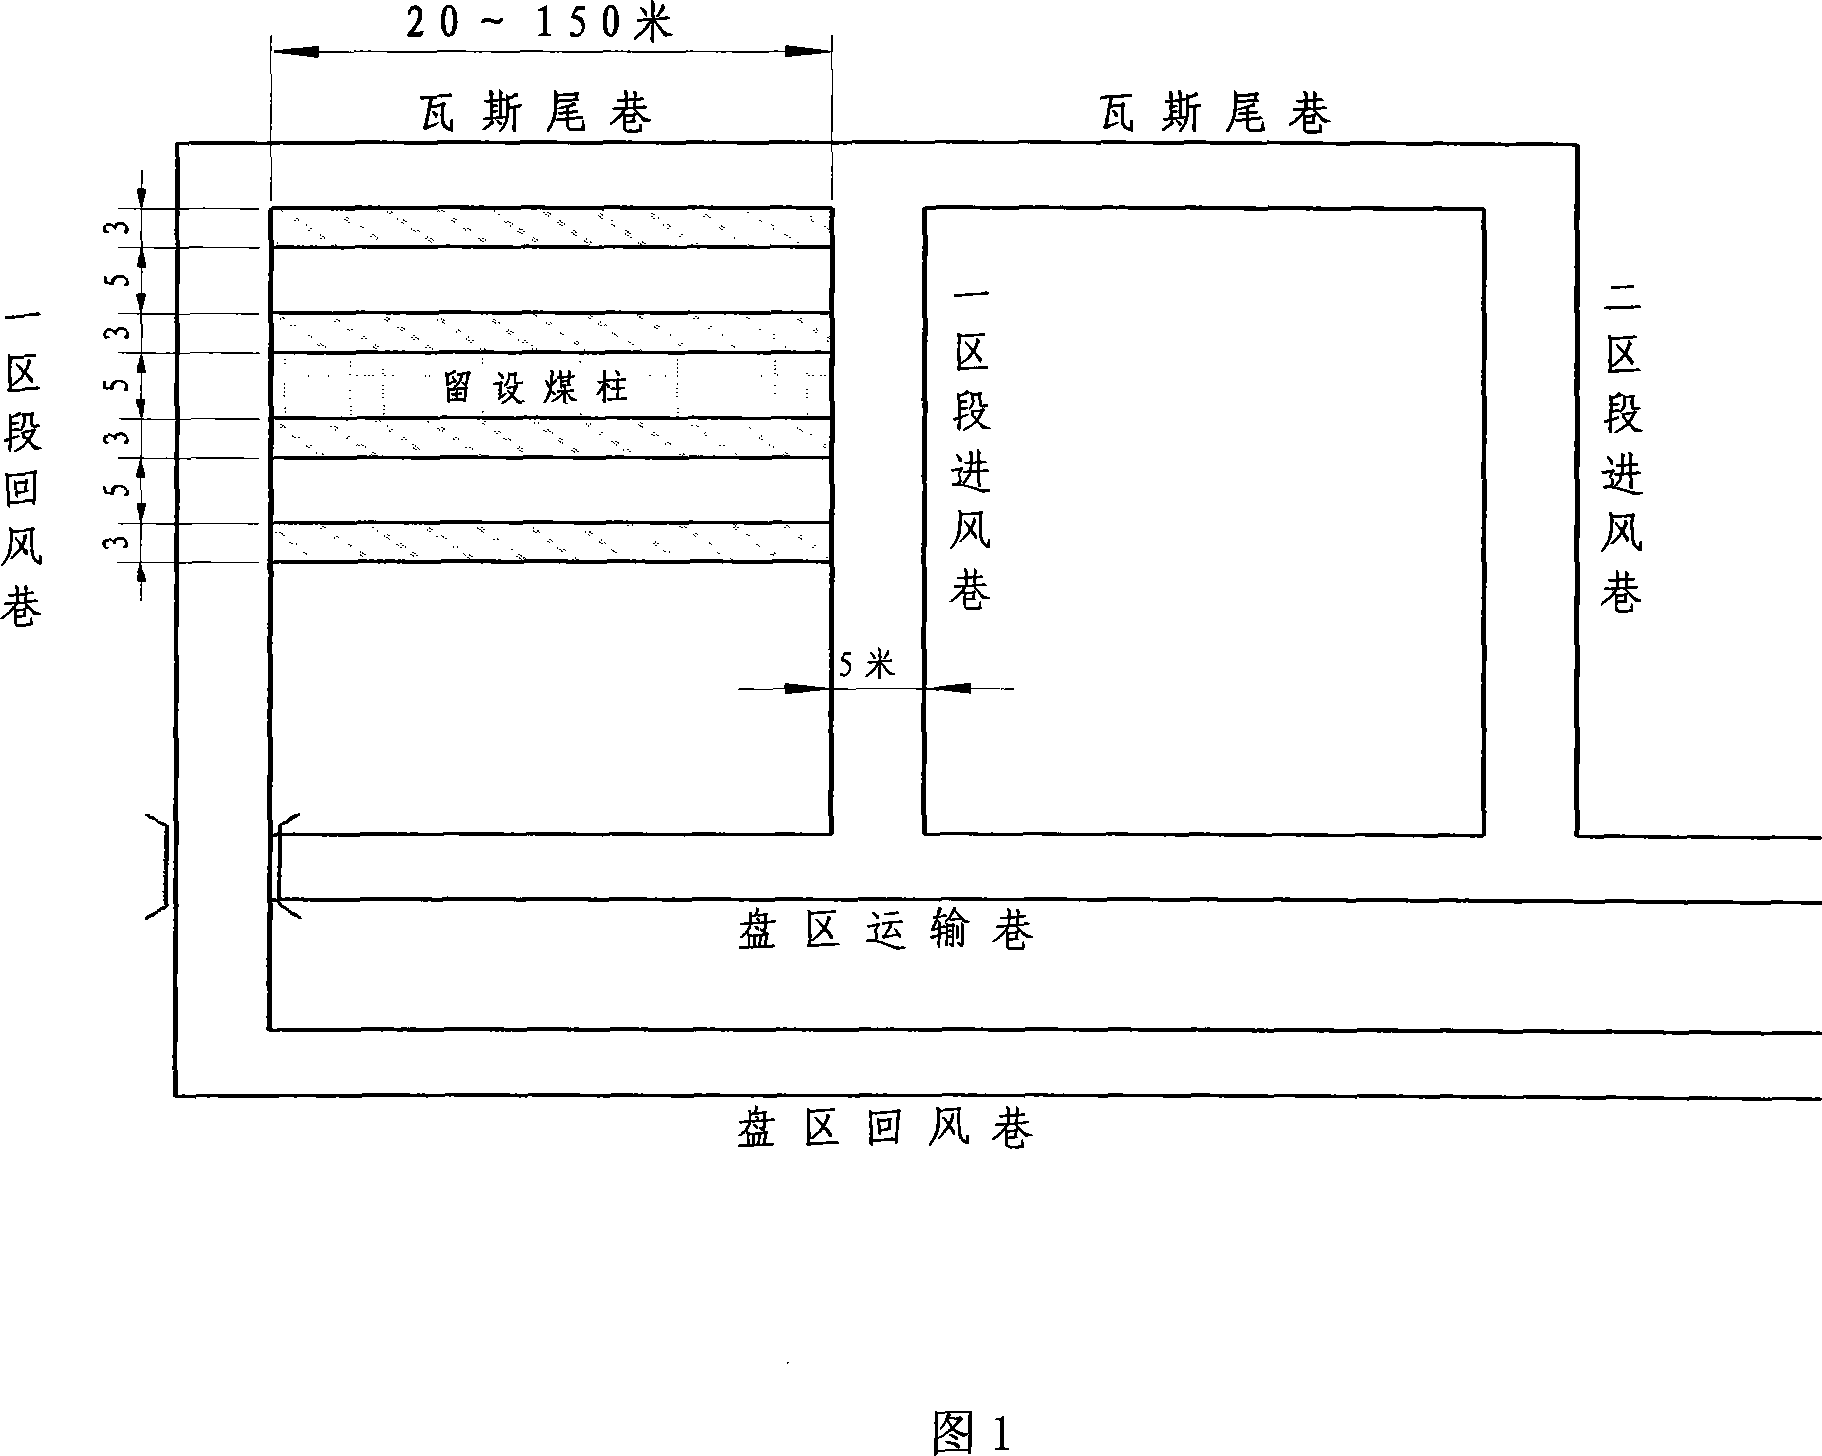 Method for coal mine downhole reproduction and back production